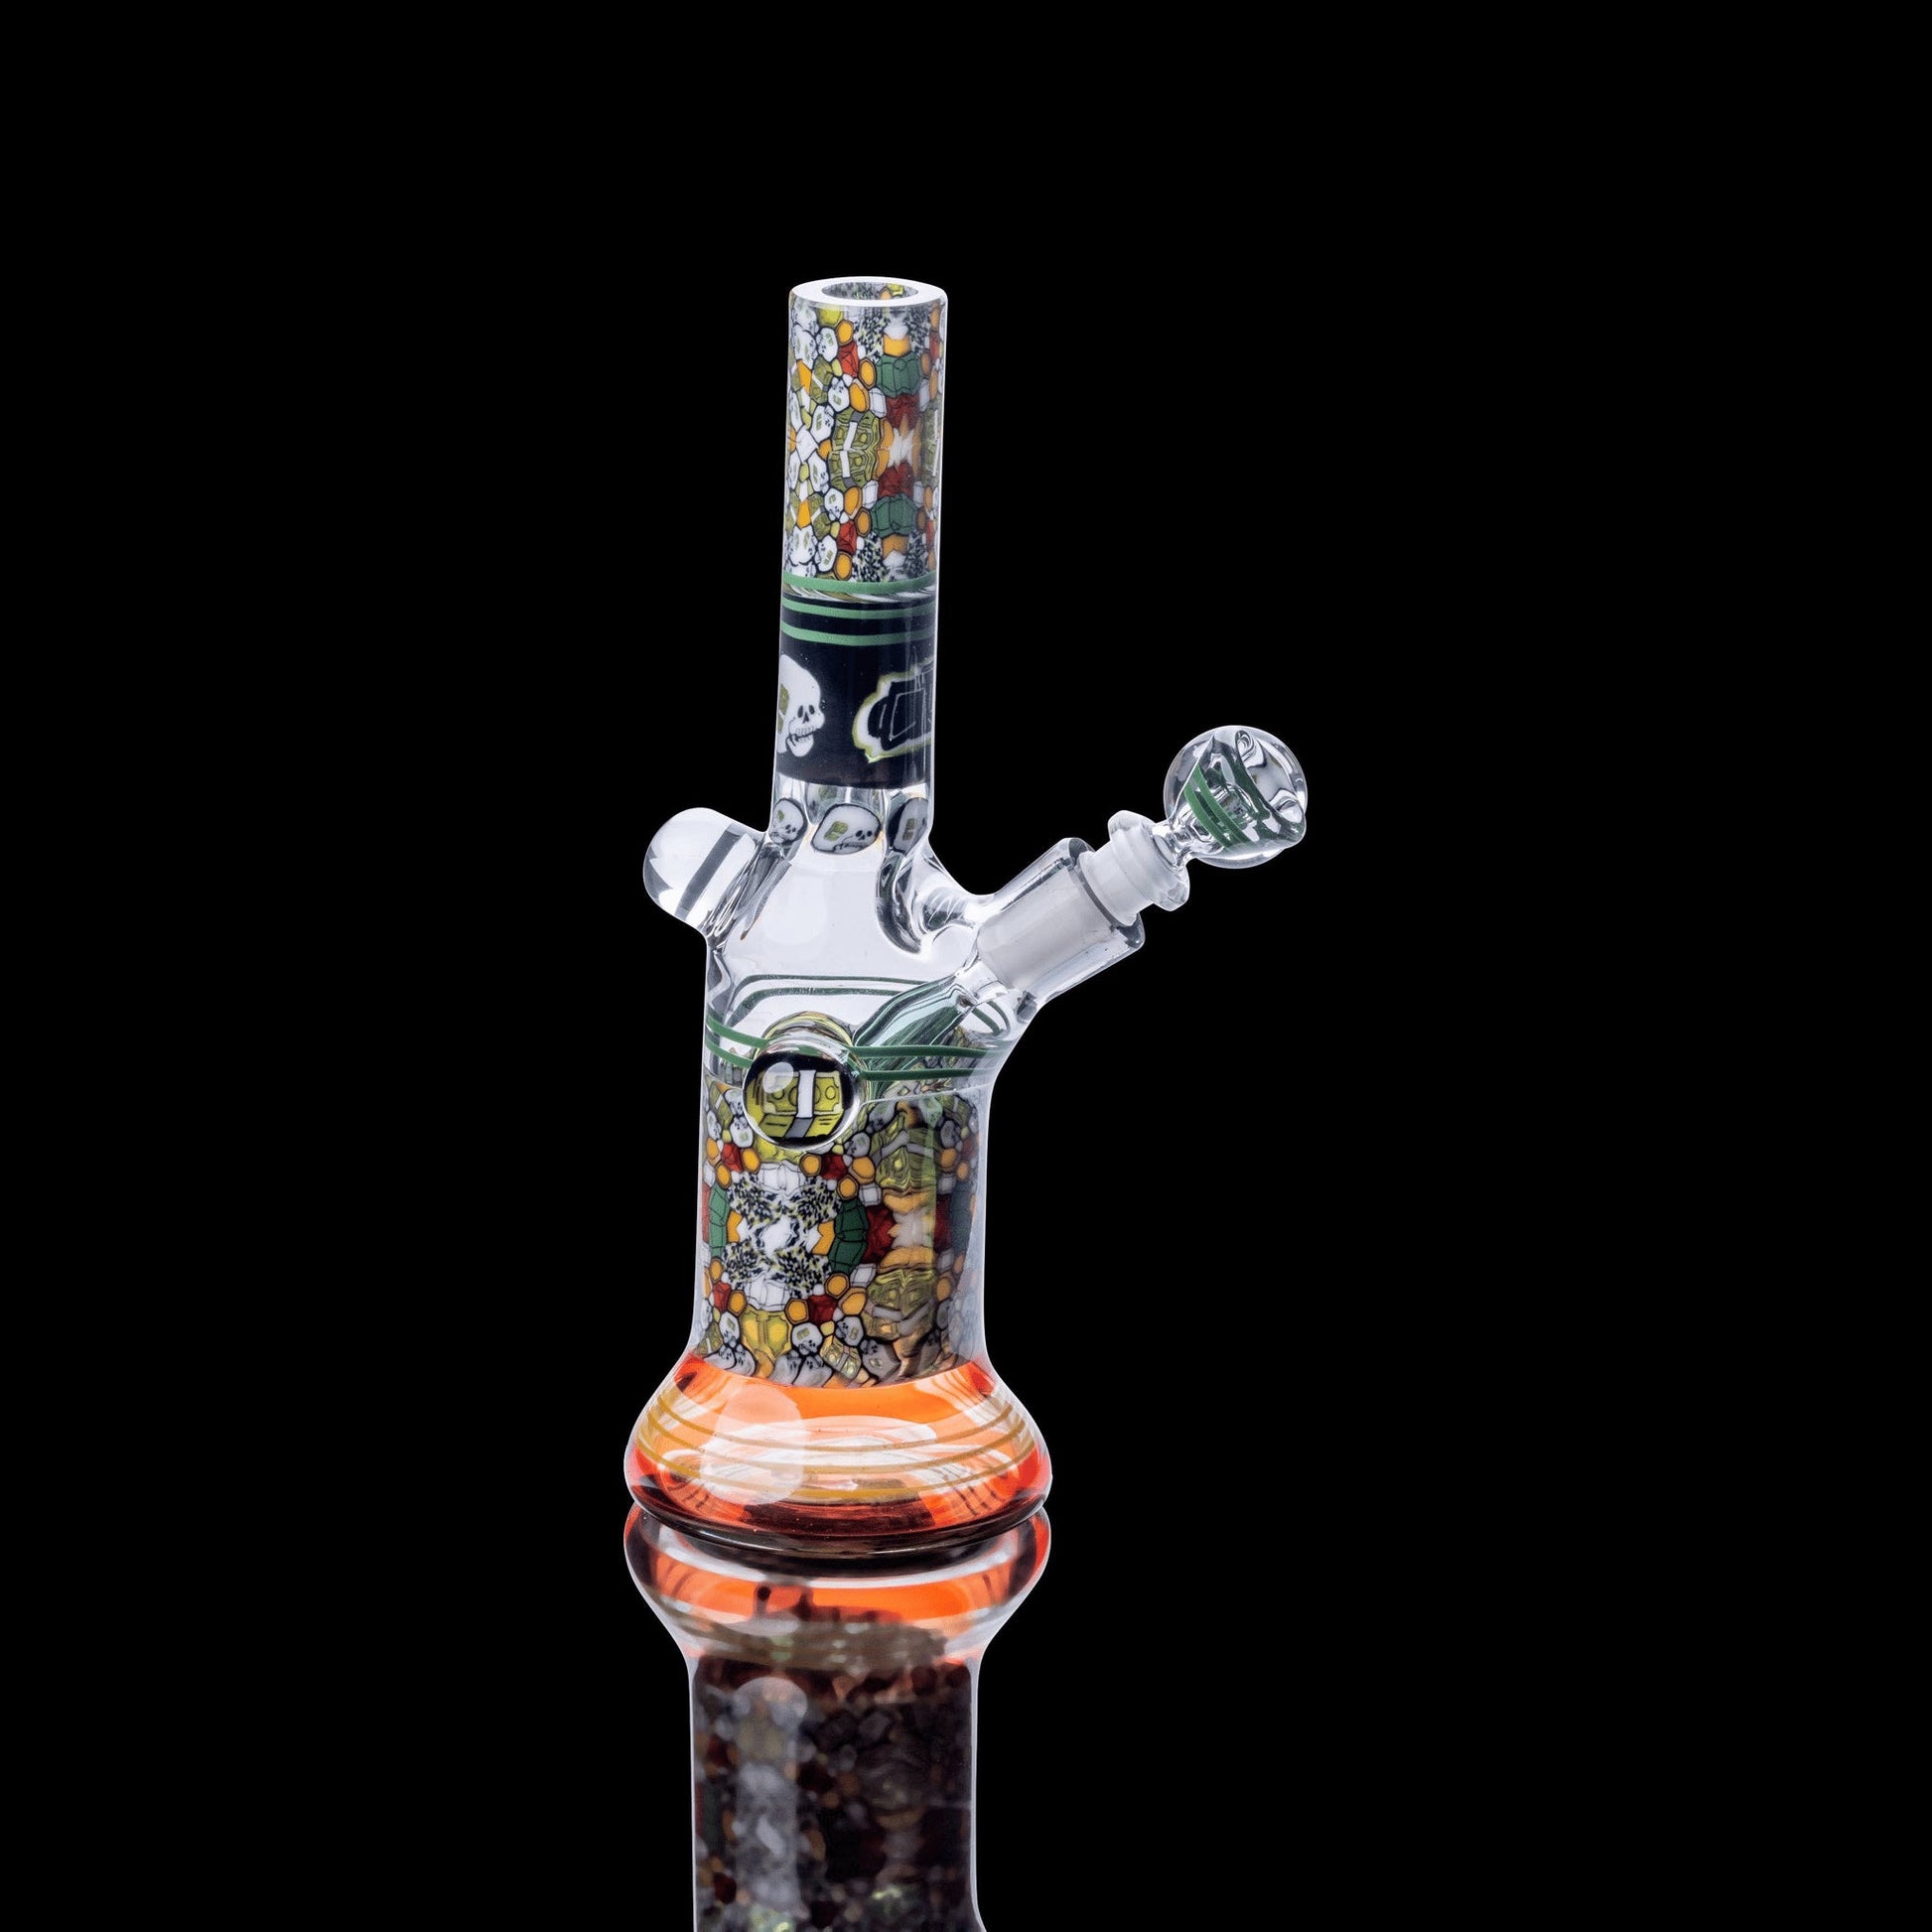 exquisite art piece - Collab Insano Tube by GROE x AKM (Got The Juice 2022)